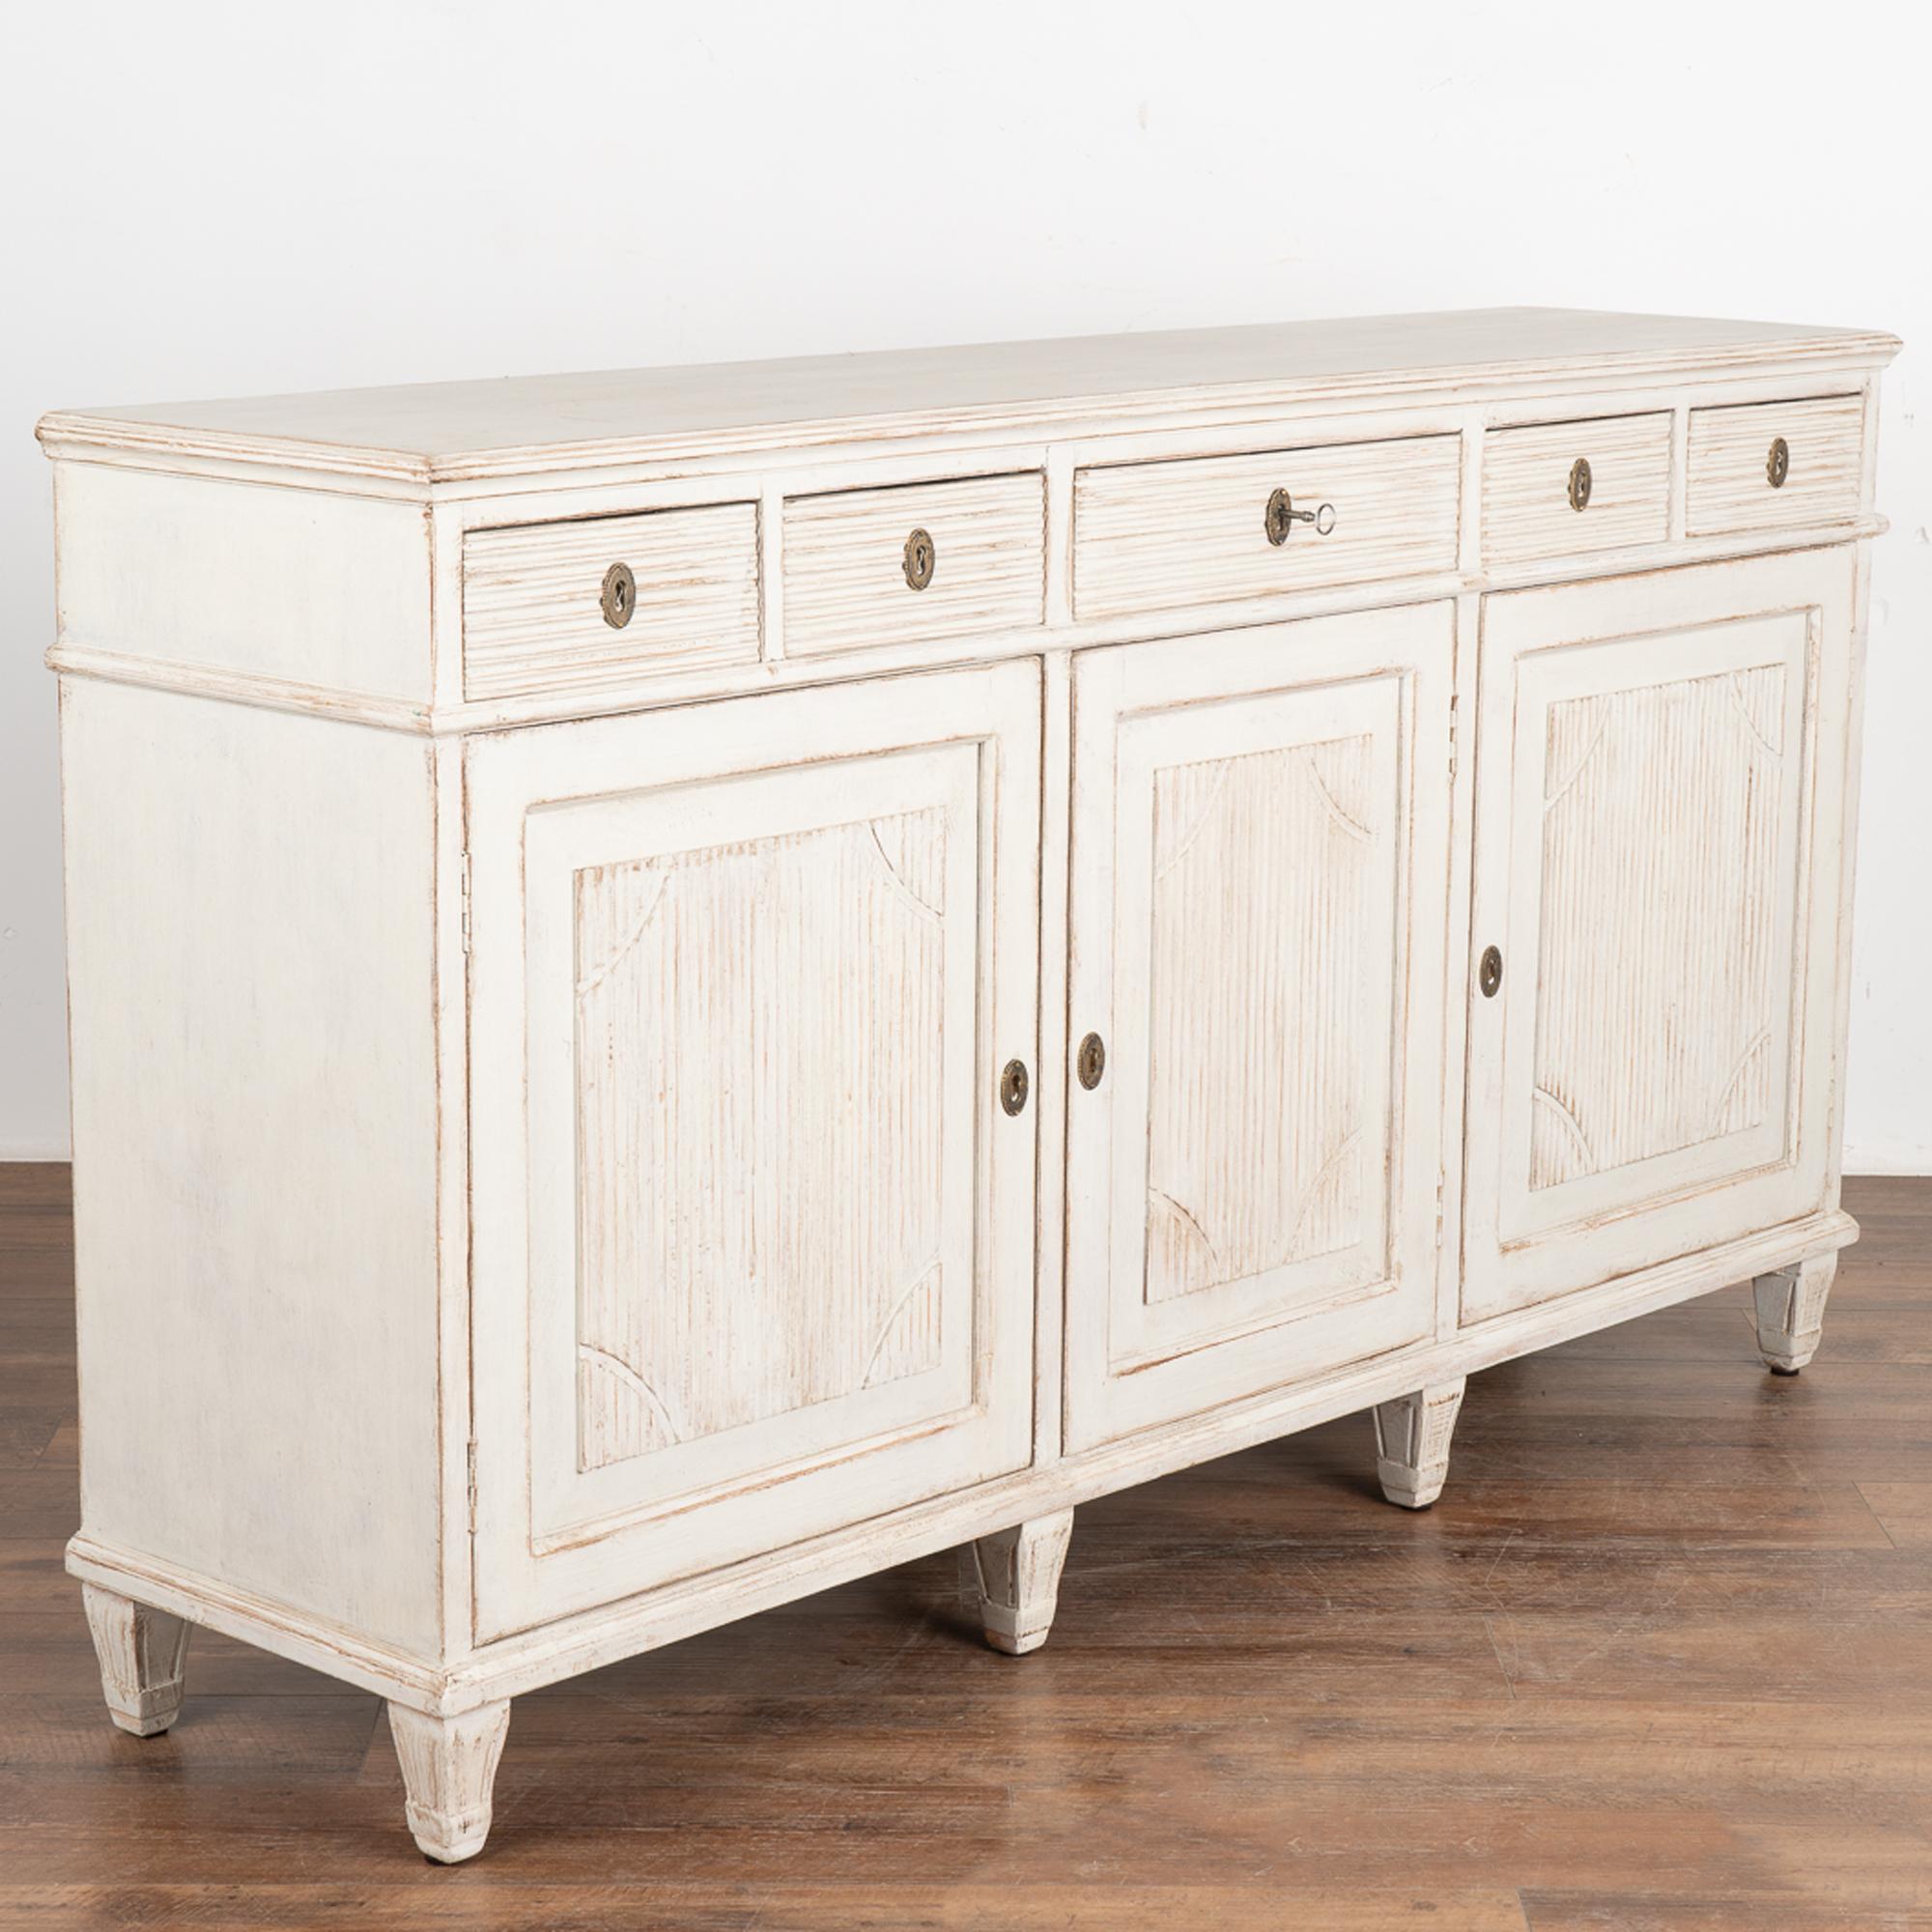 Large pine sideboard with traditional Swedish carved fluted details along panel doors and drawers.
At over 5' long with four cabinet doors and five upper drawers, this will serve as an impressive buffet resting on tapered fluted feet.
Please enlarge